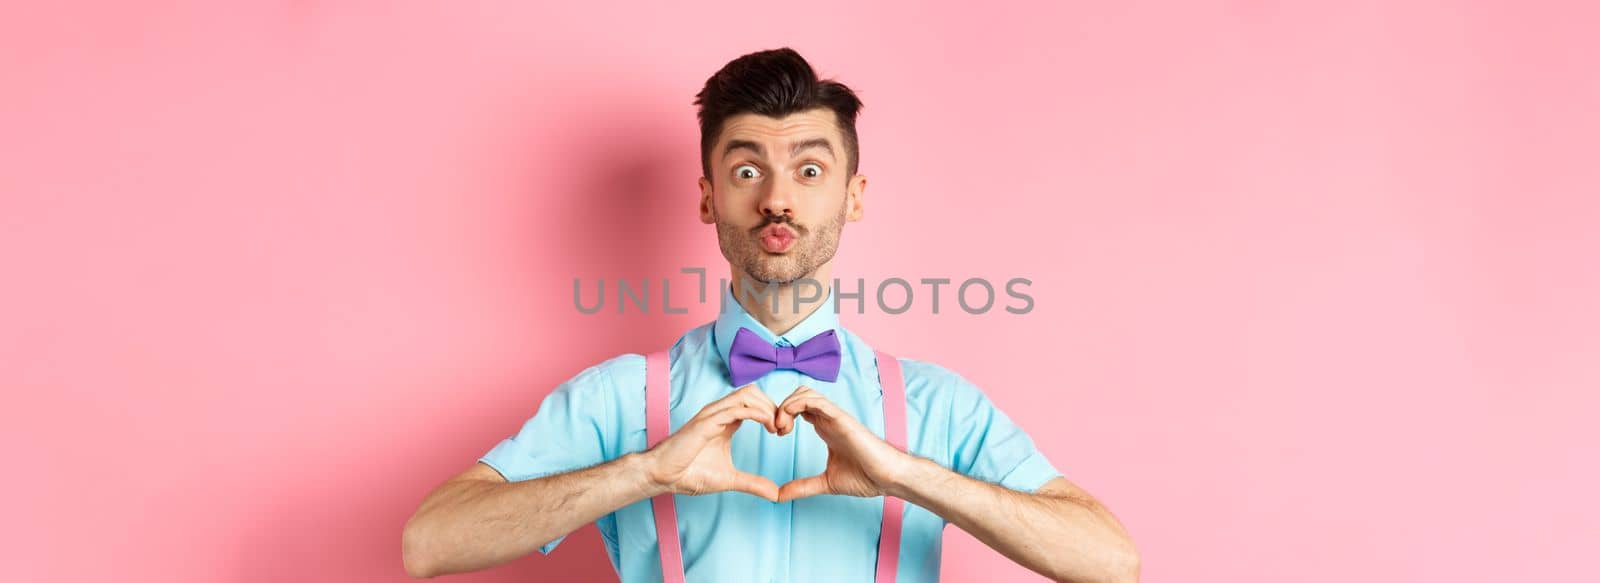 Happy Valentines day. Funny young man waiting for lovers kiss, pucker lips and show heart sign, I love you gesture, express feelings on date, pink background by Benzoix